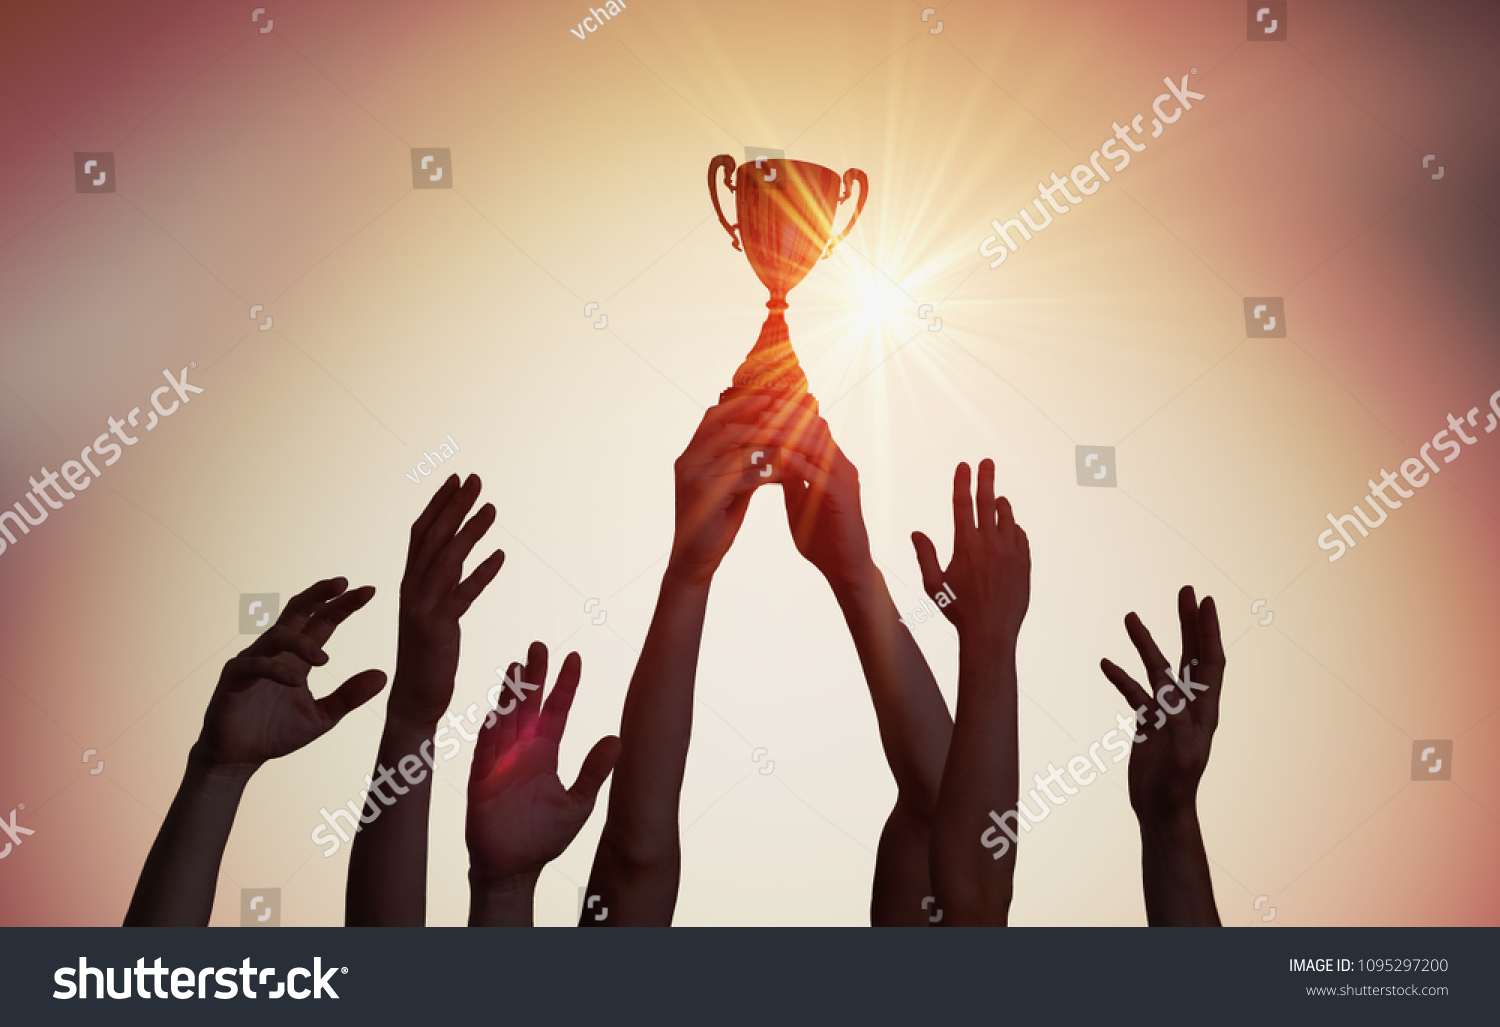 Winning team is holding trophy in hands. Silhouettes of many hands in sunset. #1095297200